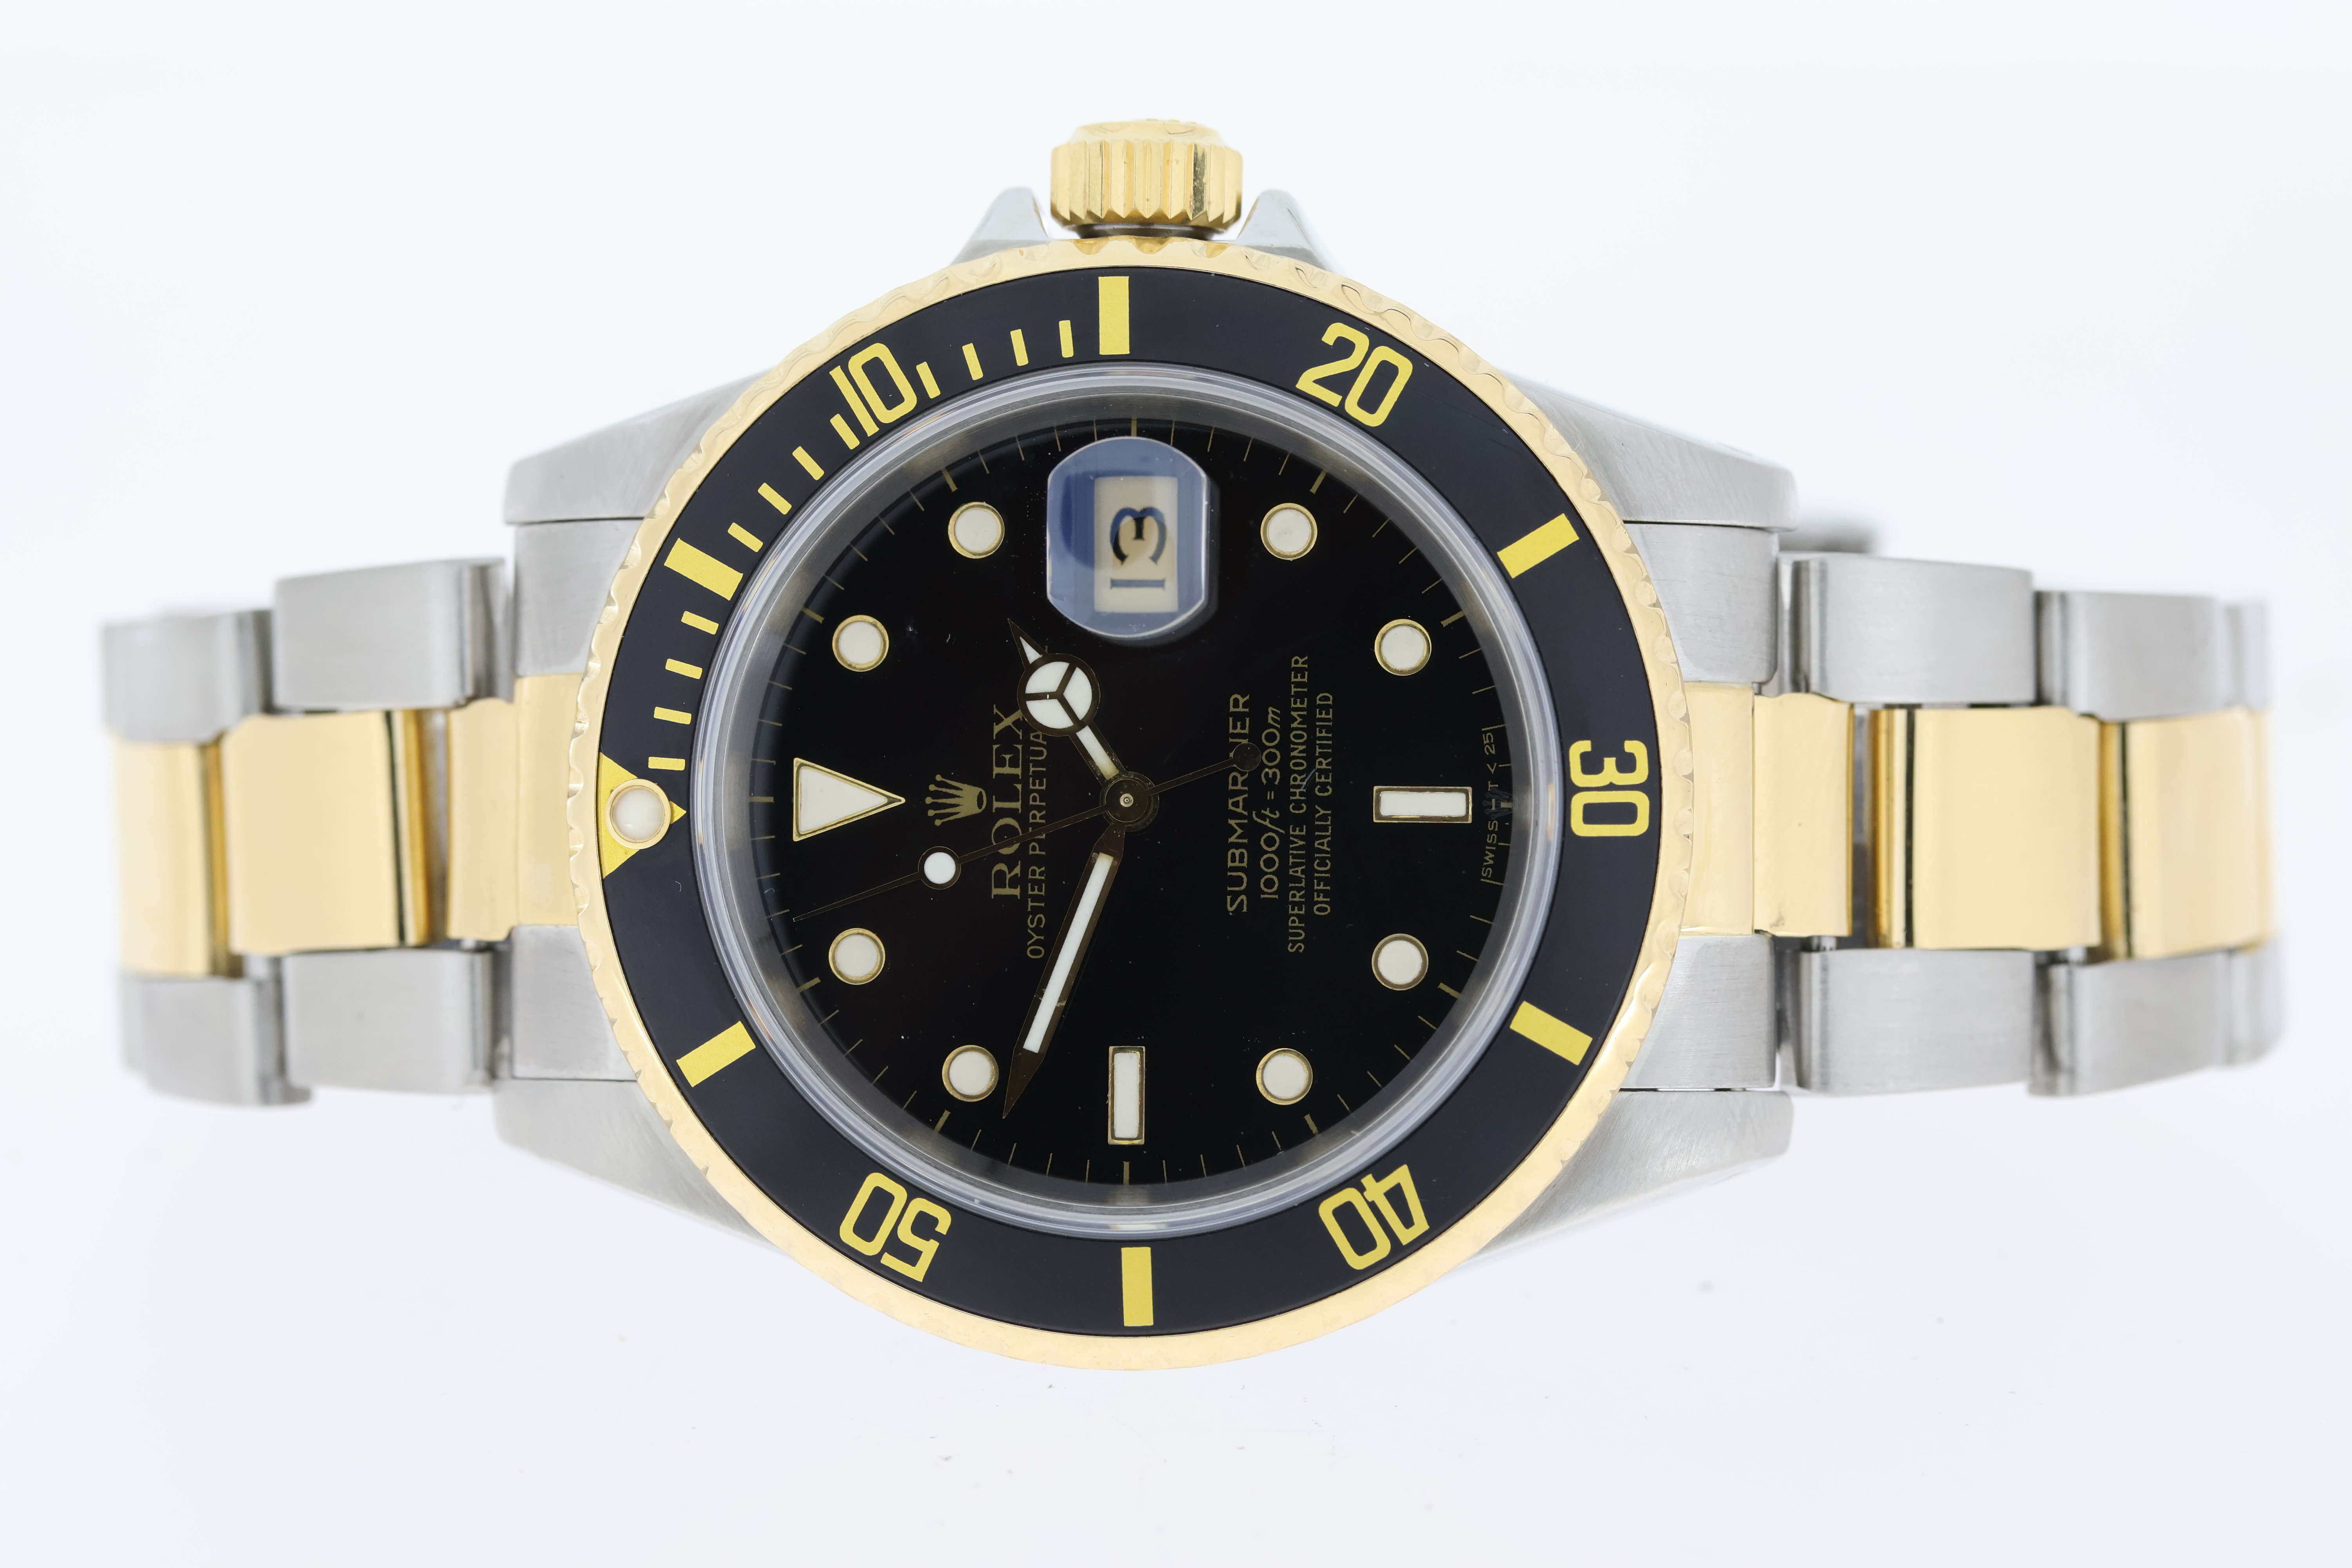 Rolex Submariner Date Reference 16613 with Box and Papers Circa 1990 - Image 2 of 5